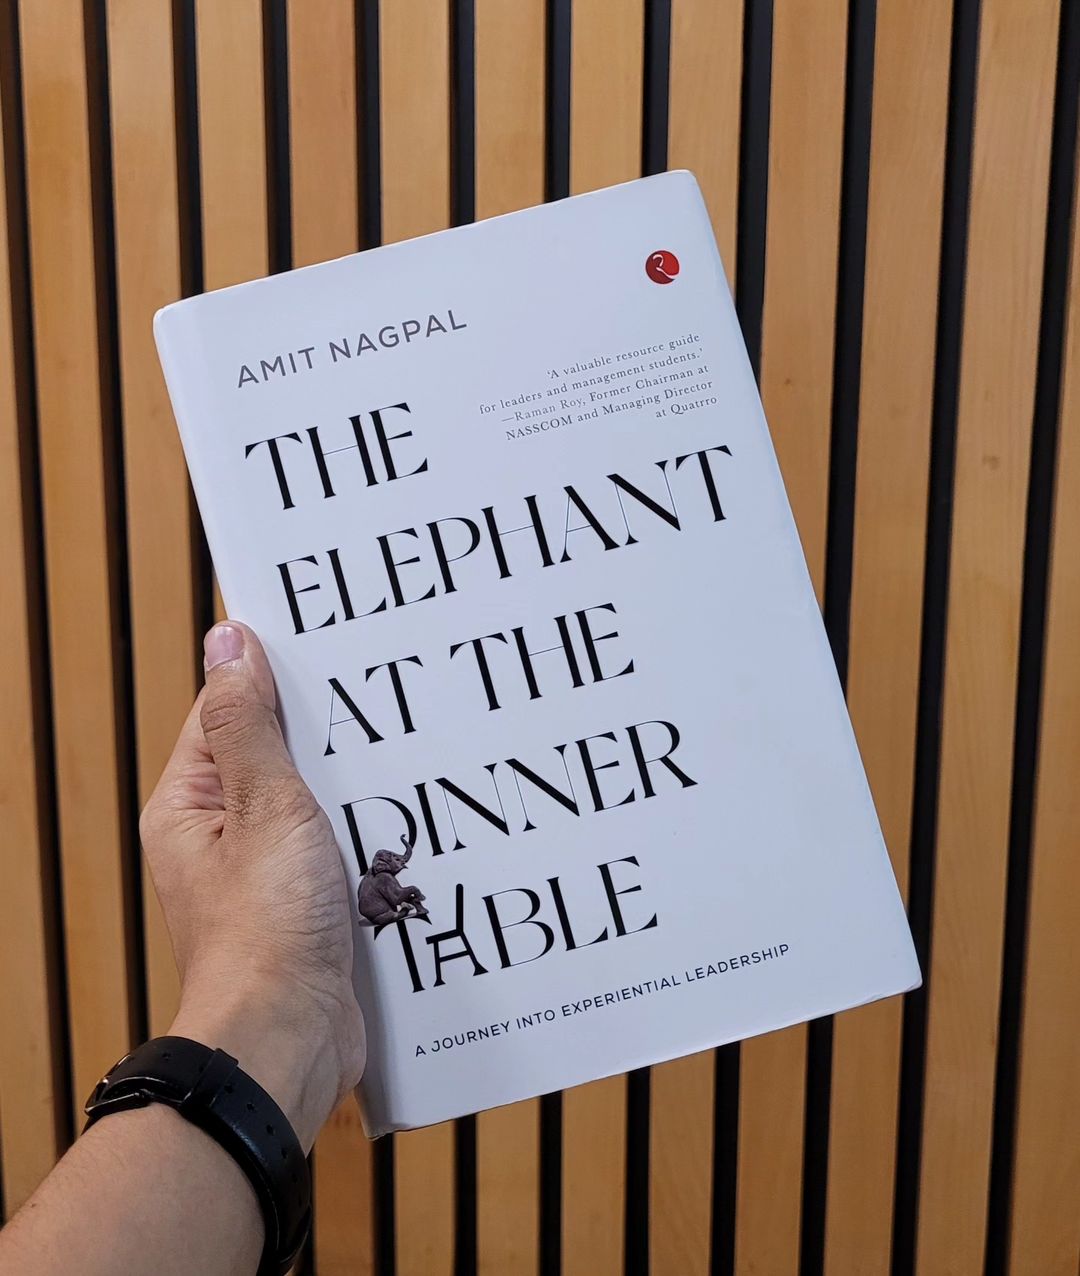 The Elephant at The Dinner Table by Amit Nagpal